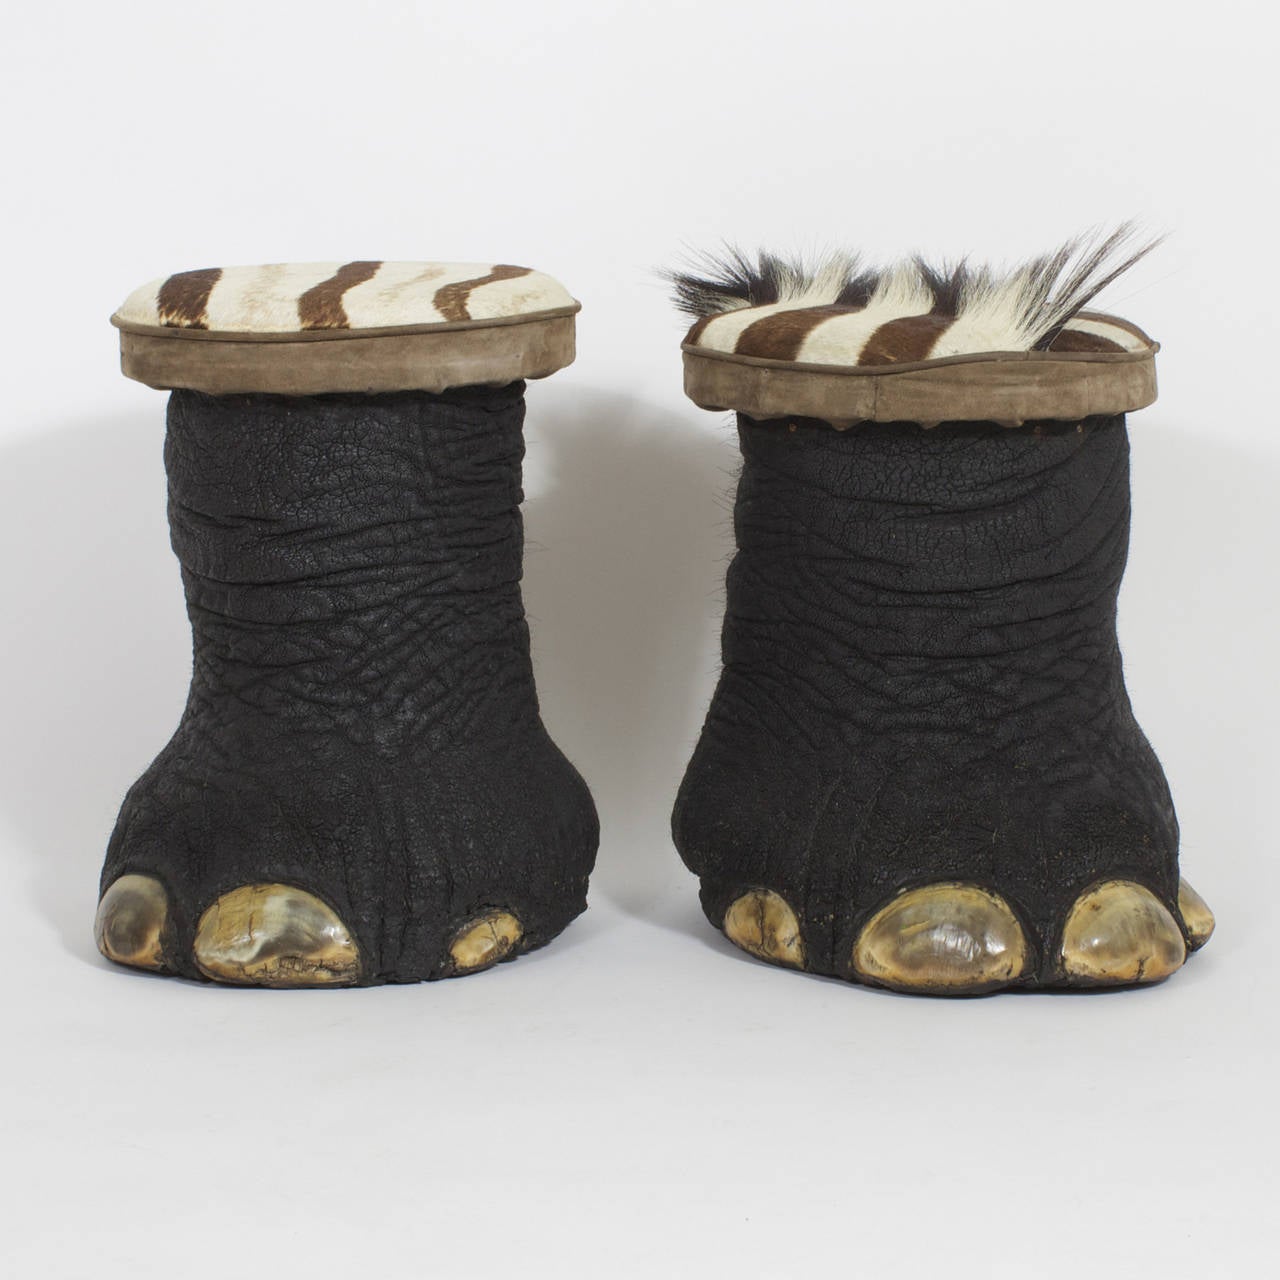 Organic pair of taxidermic elephants feet re purposed as foot stools or benches with seats upholstered in Zebra that is trimmed with suede. We are not condoning the hunting of Elephants or any other animals but these where made from an elephant that